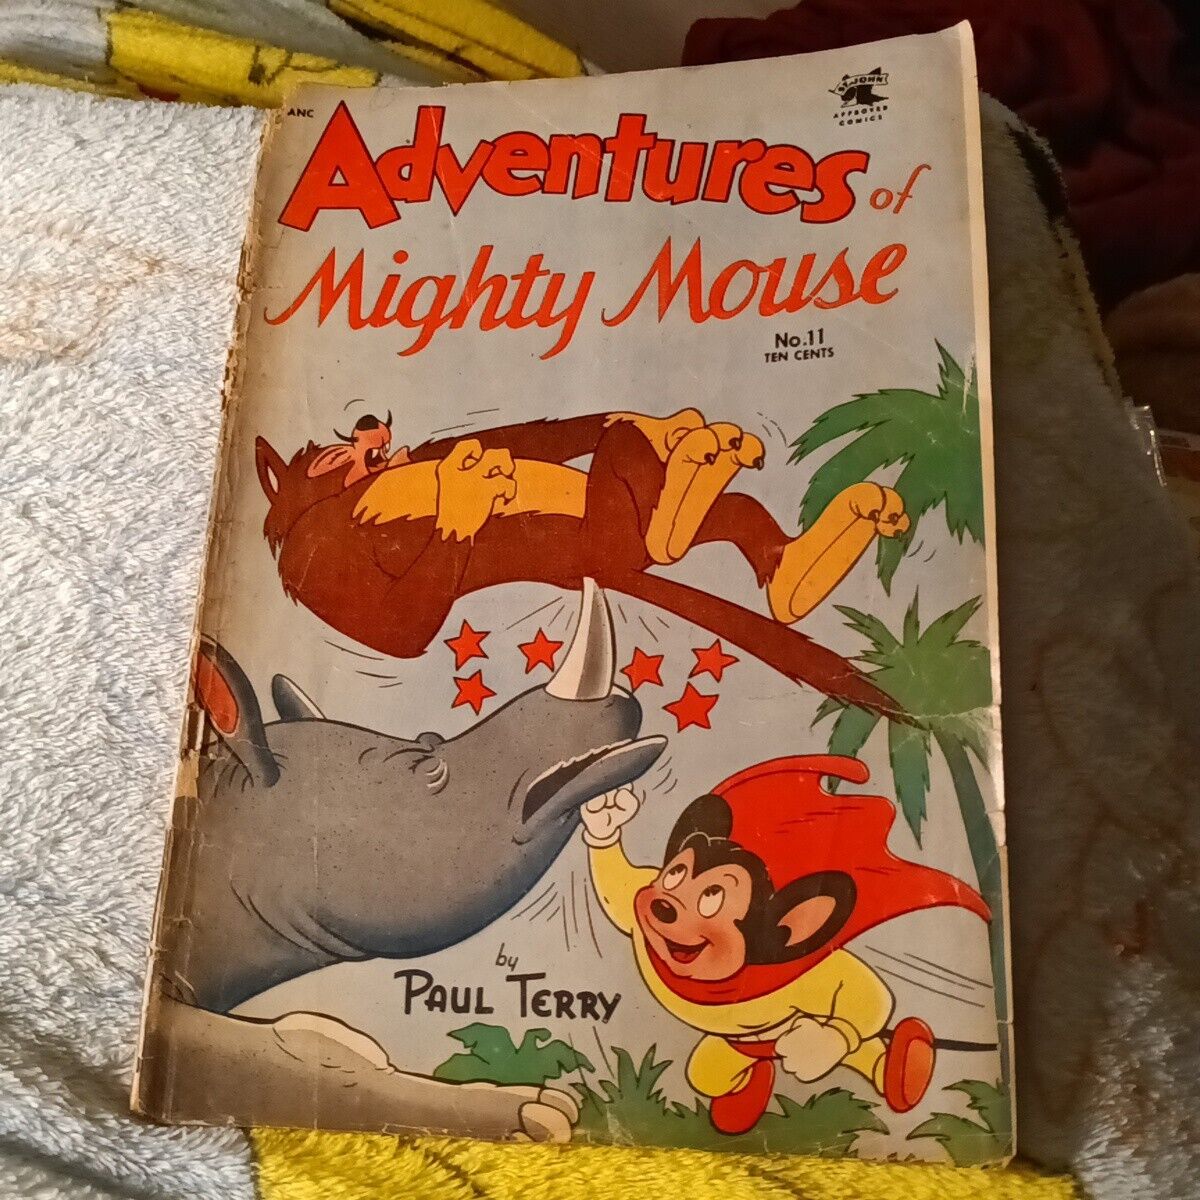 Adventures Of Mighty Mouse #11 st John comics 1954 golden age funny animal hero 